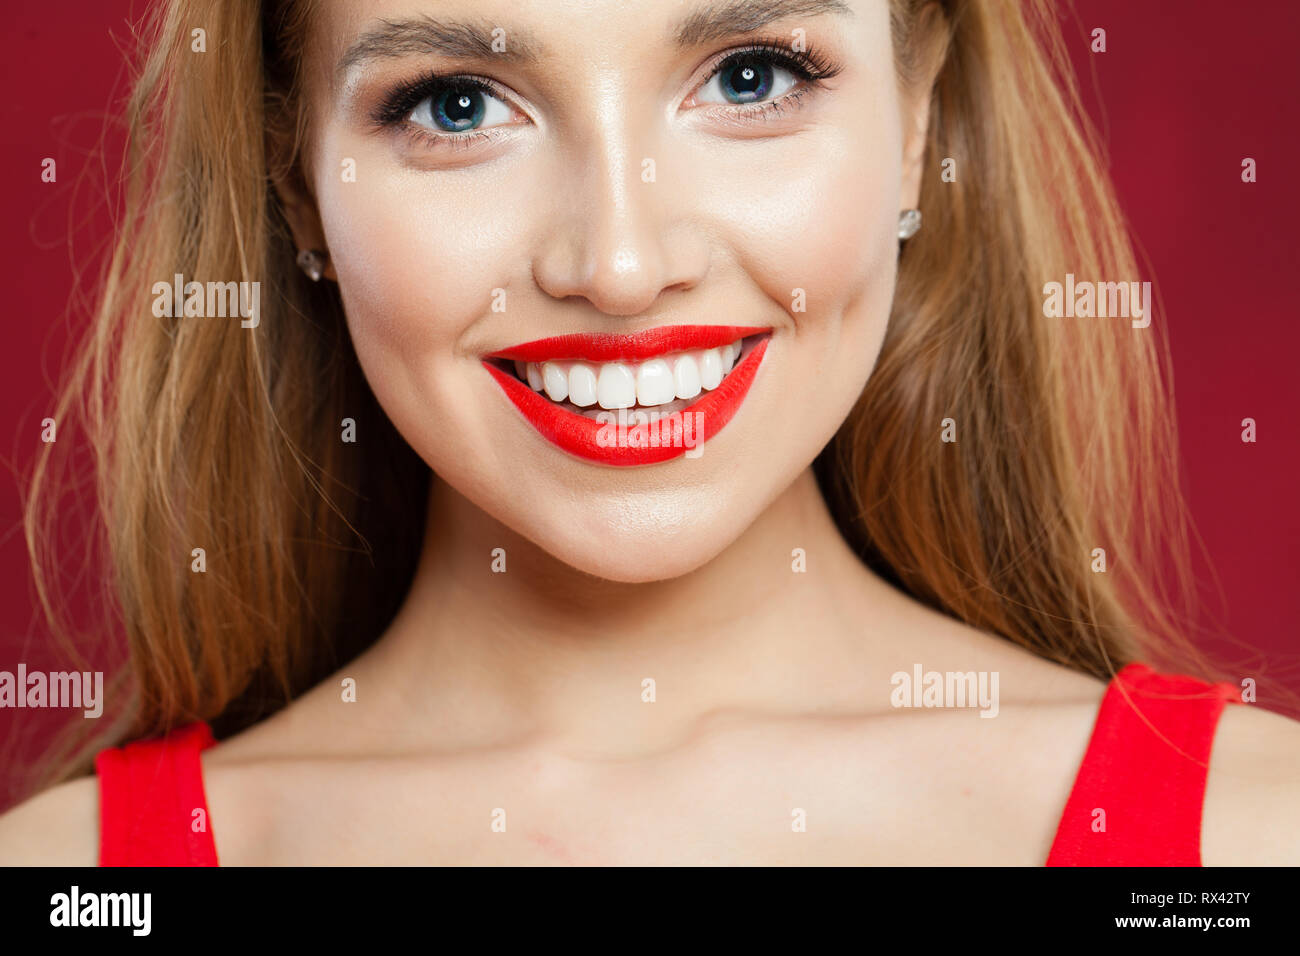 Young beautiful girl with cute smile closeup. Smiling woman with red lips makeup portrait Stock Photo